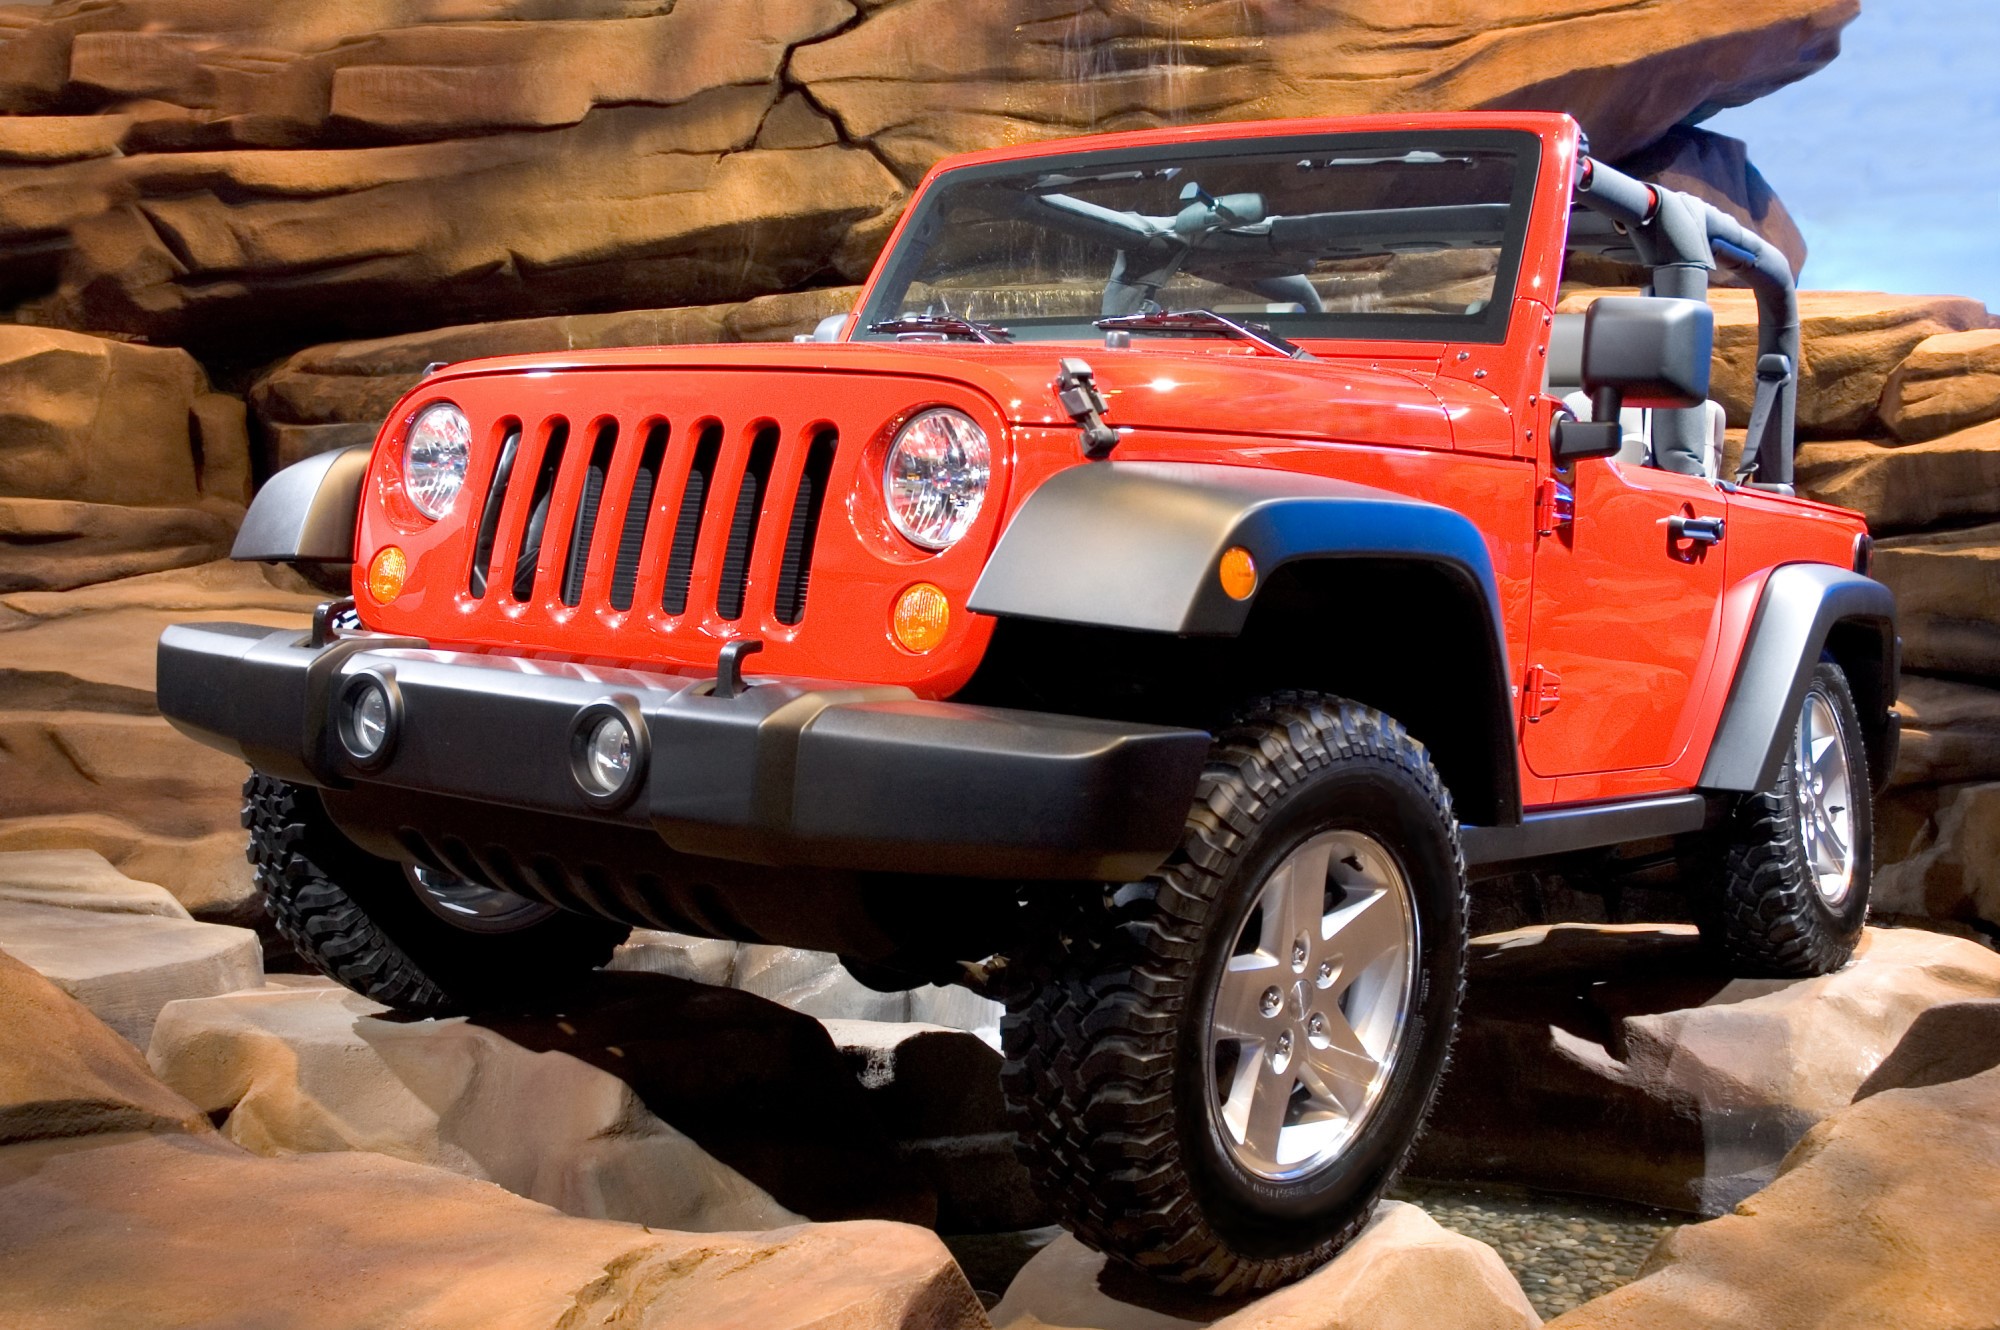 Jeep Off Roading The Do's and Don'ts of Taking Your Jeep off the